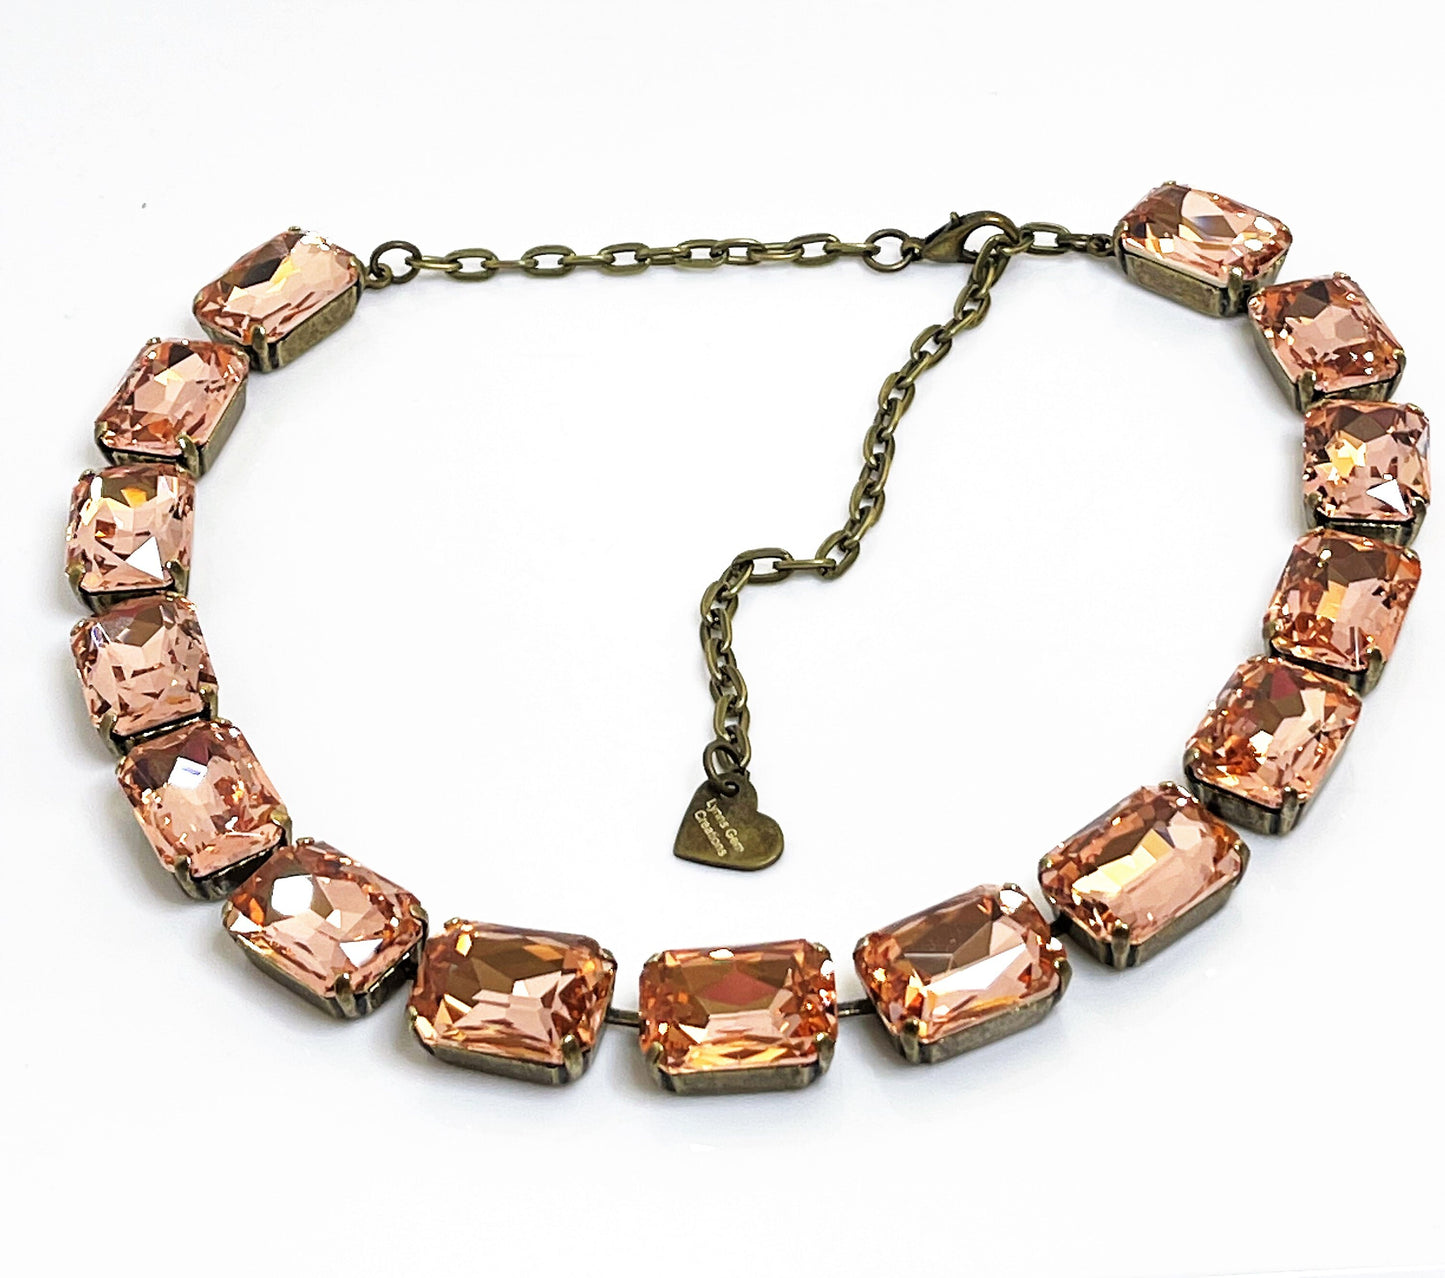 Peach Georgian Collet Necklace, Premium Crystal, Anna Wintour Style, Light Silk Riviere, Statement Necklace, Layering Chokers